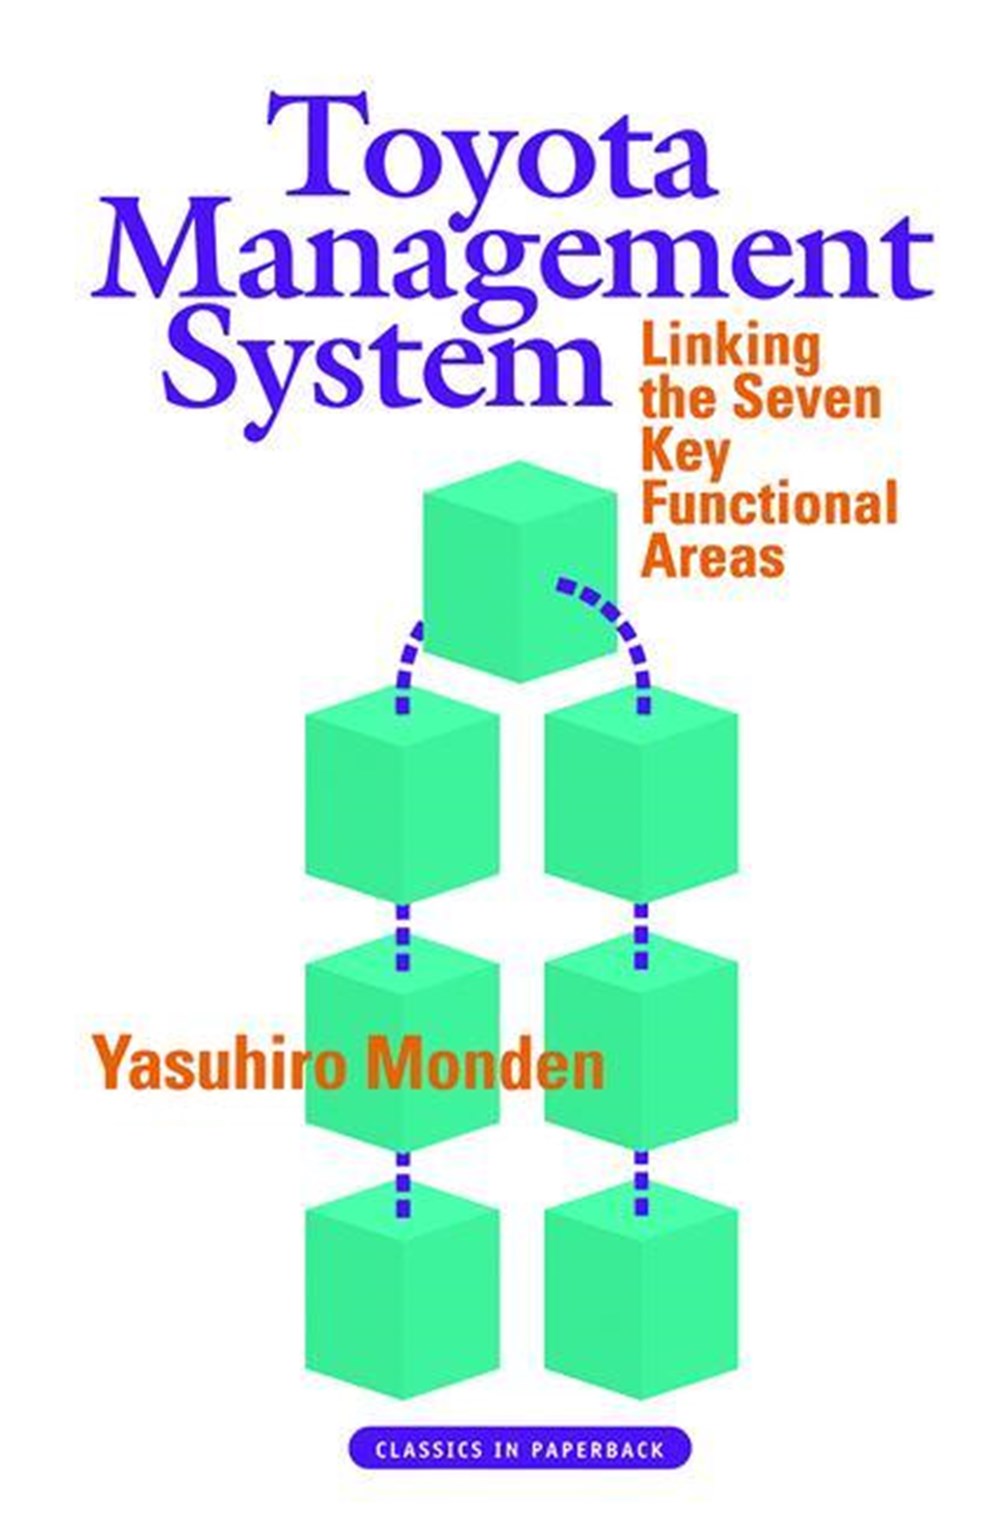 Toyota Management System: Linking the Seven Key Functional Areas